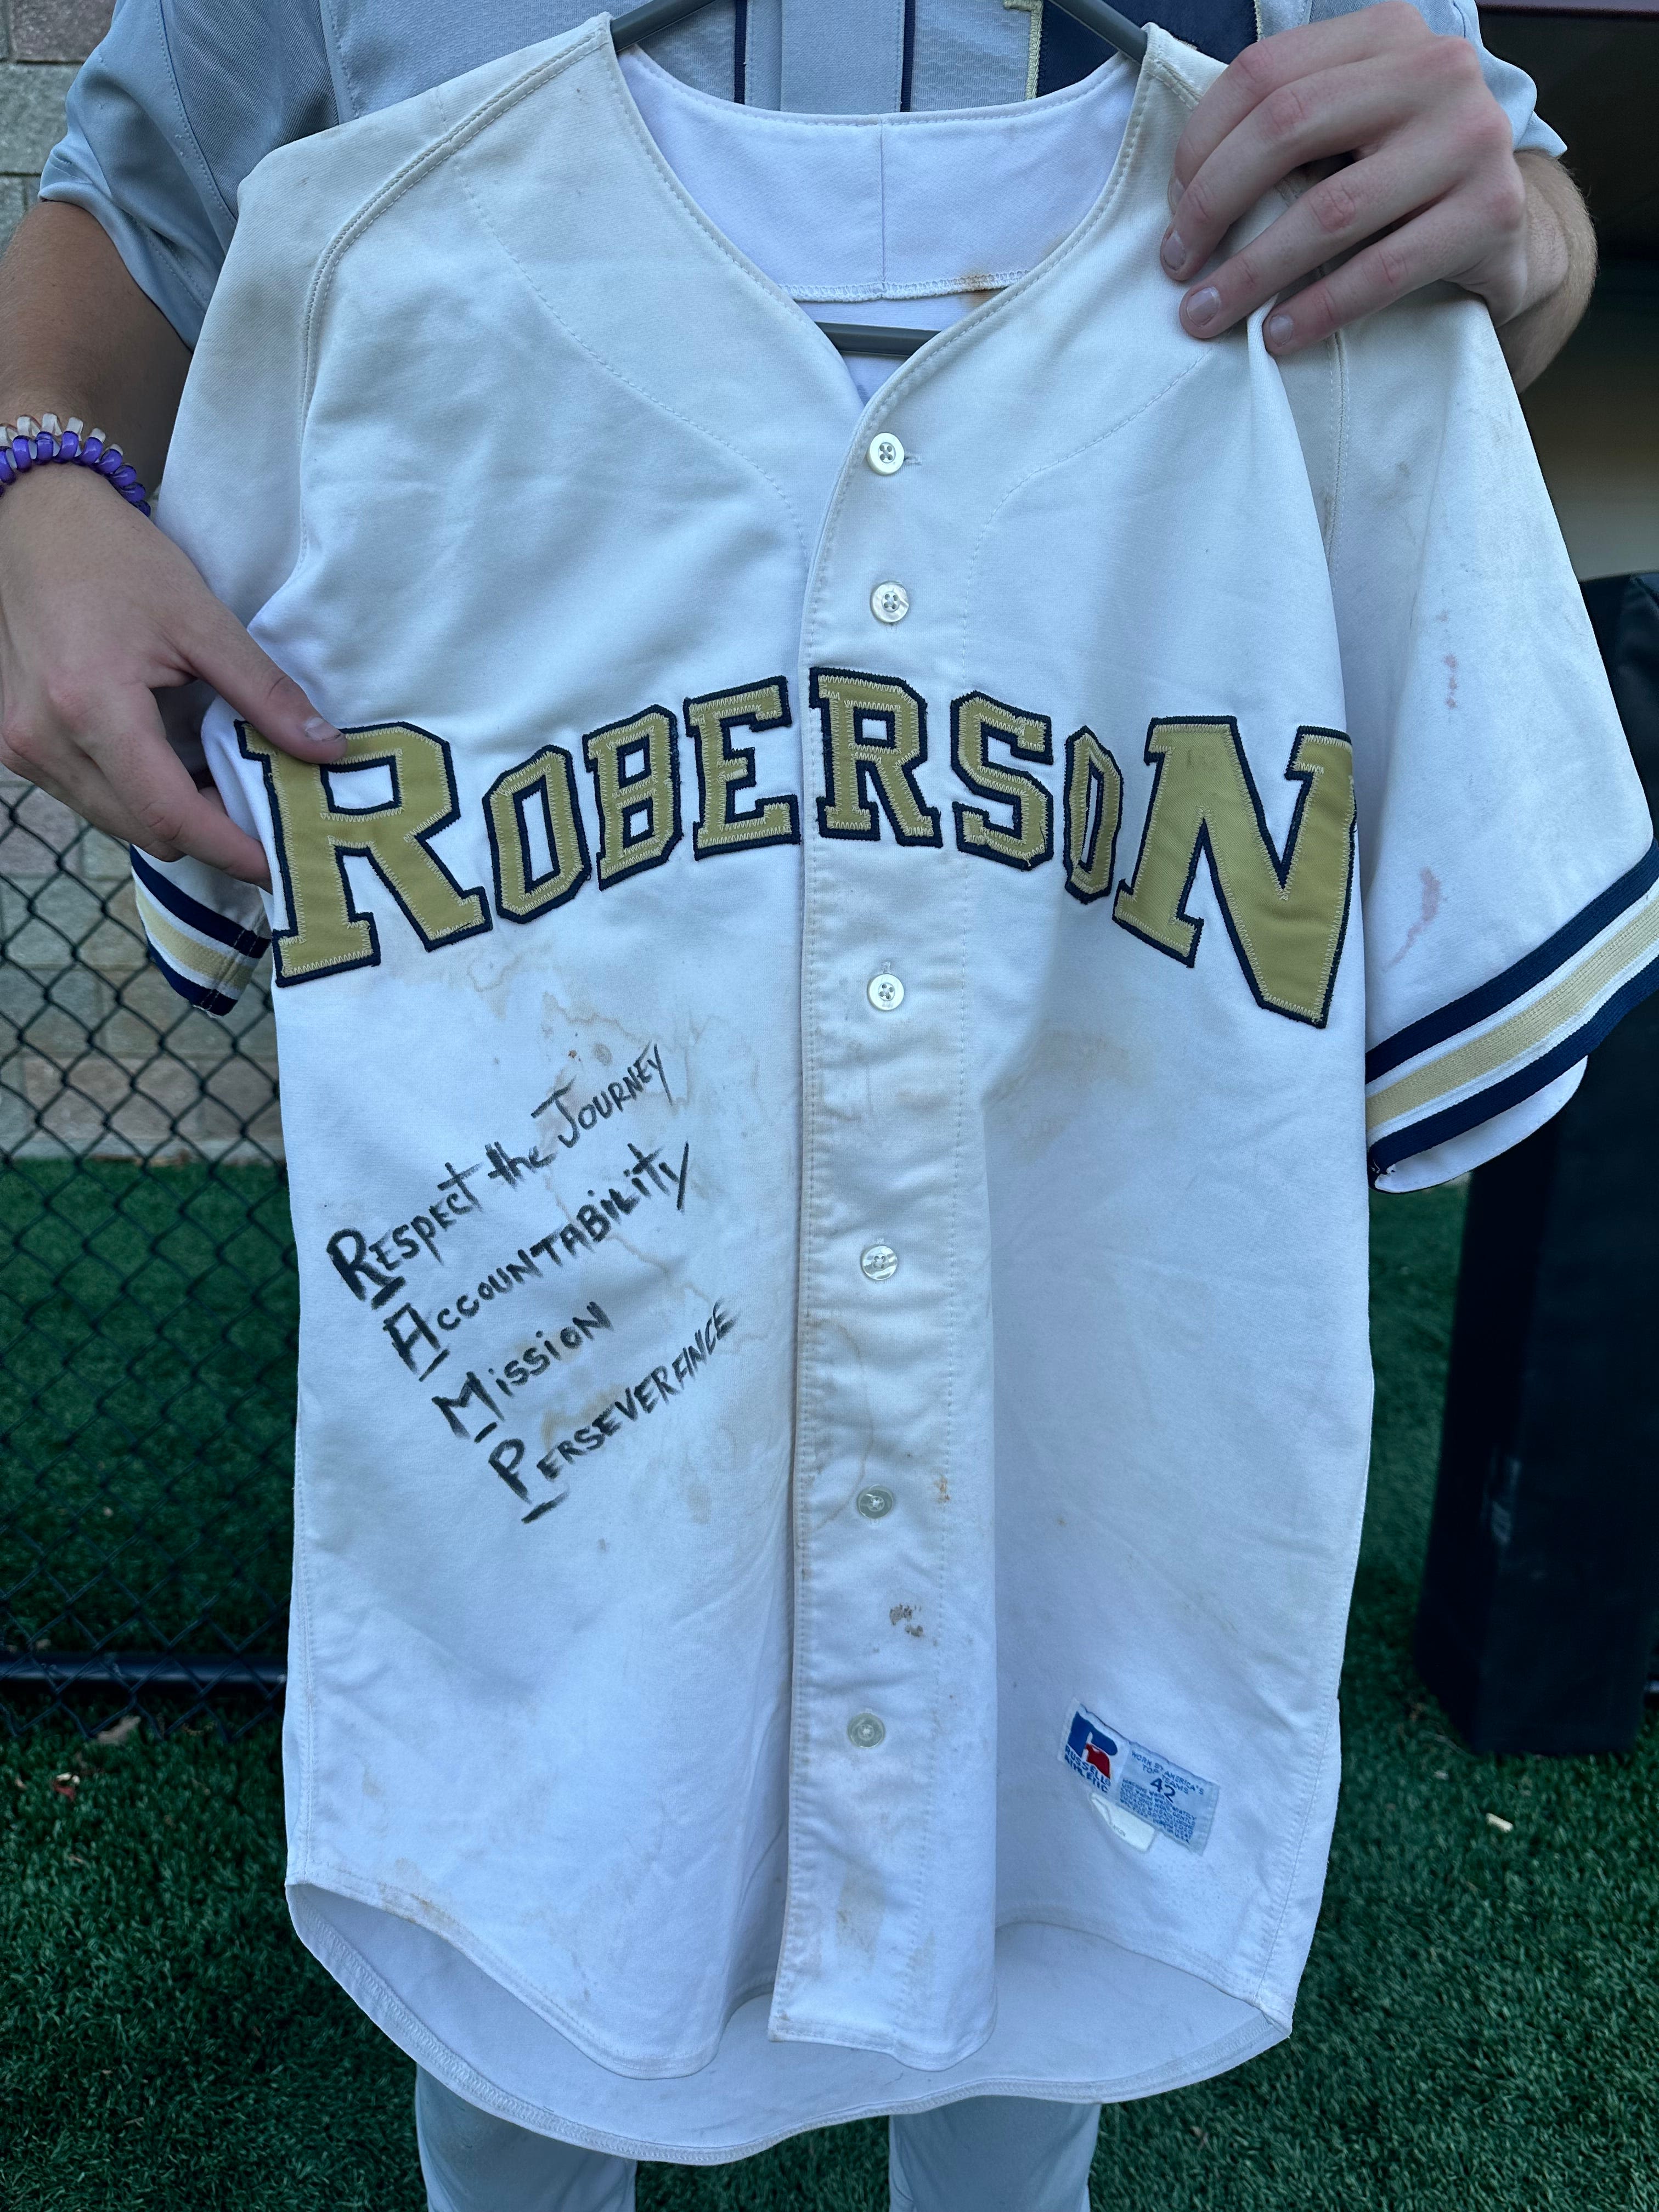 How an old jersey represents Roberson baseball's grit in NCHSAA 4A state title defense